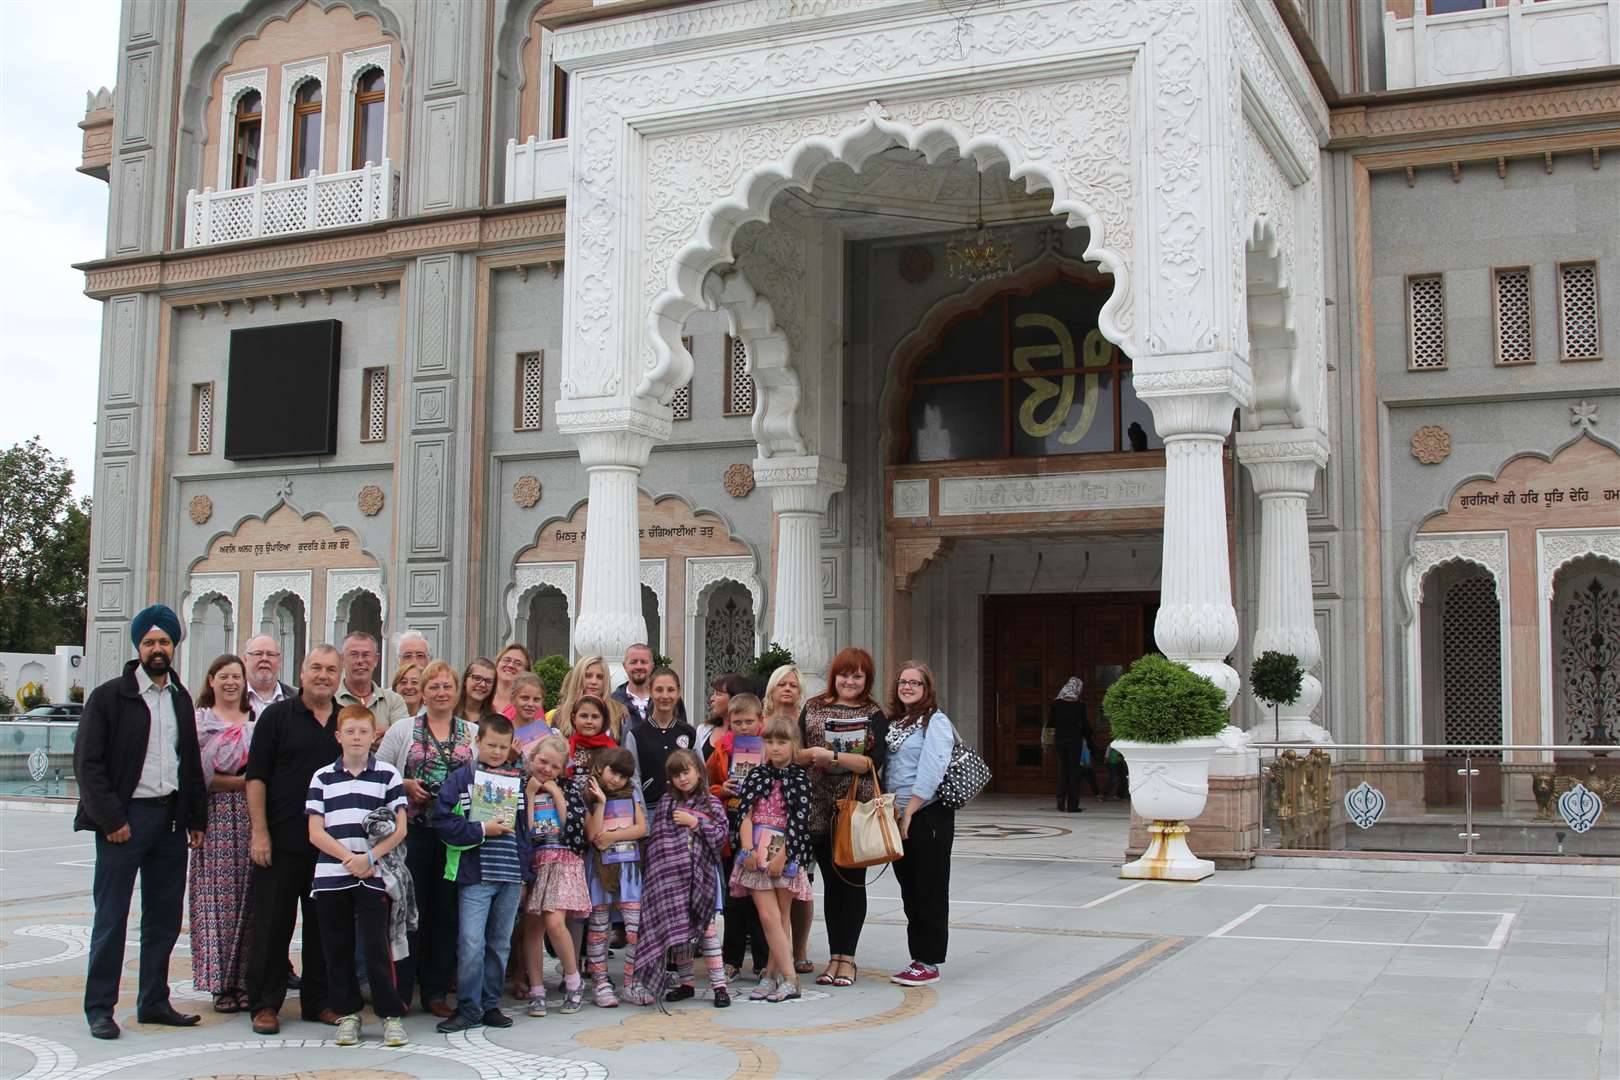 A group of children from Chernobyl have come on holiday thanks to host families in Gravesend.